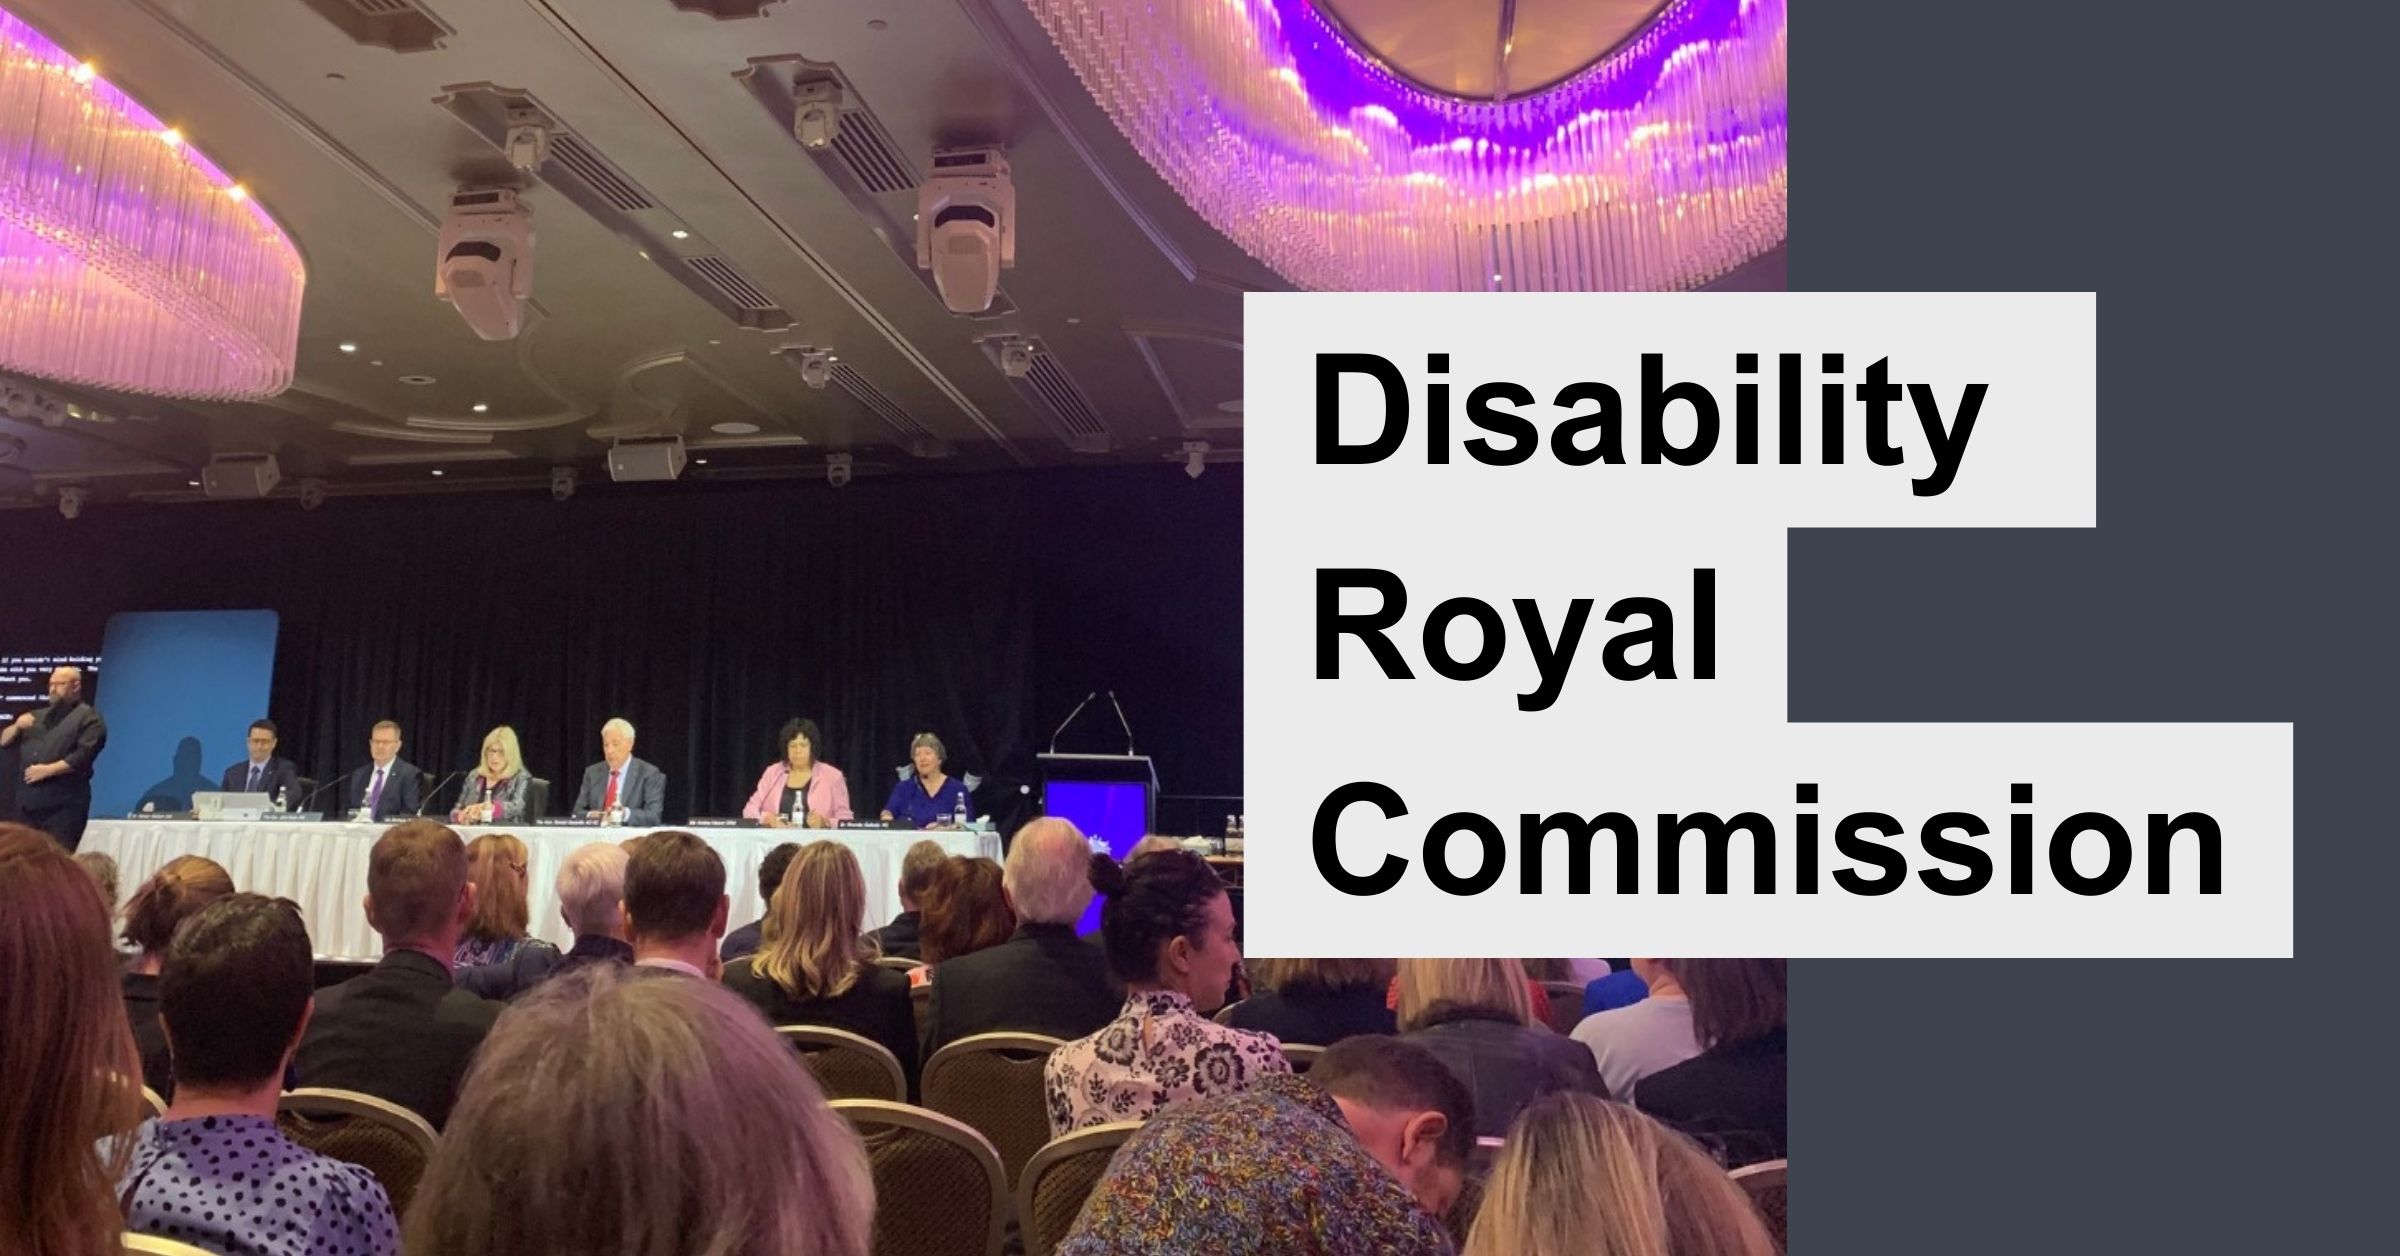 A photo of a panel of six people in suits and dresses sitting at a long desk in a conference room. An audience sits in front of them. Text to the right reads "Disability Royal Commission".